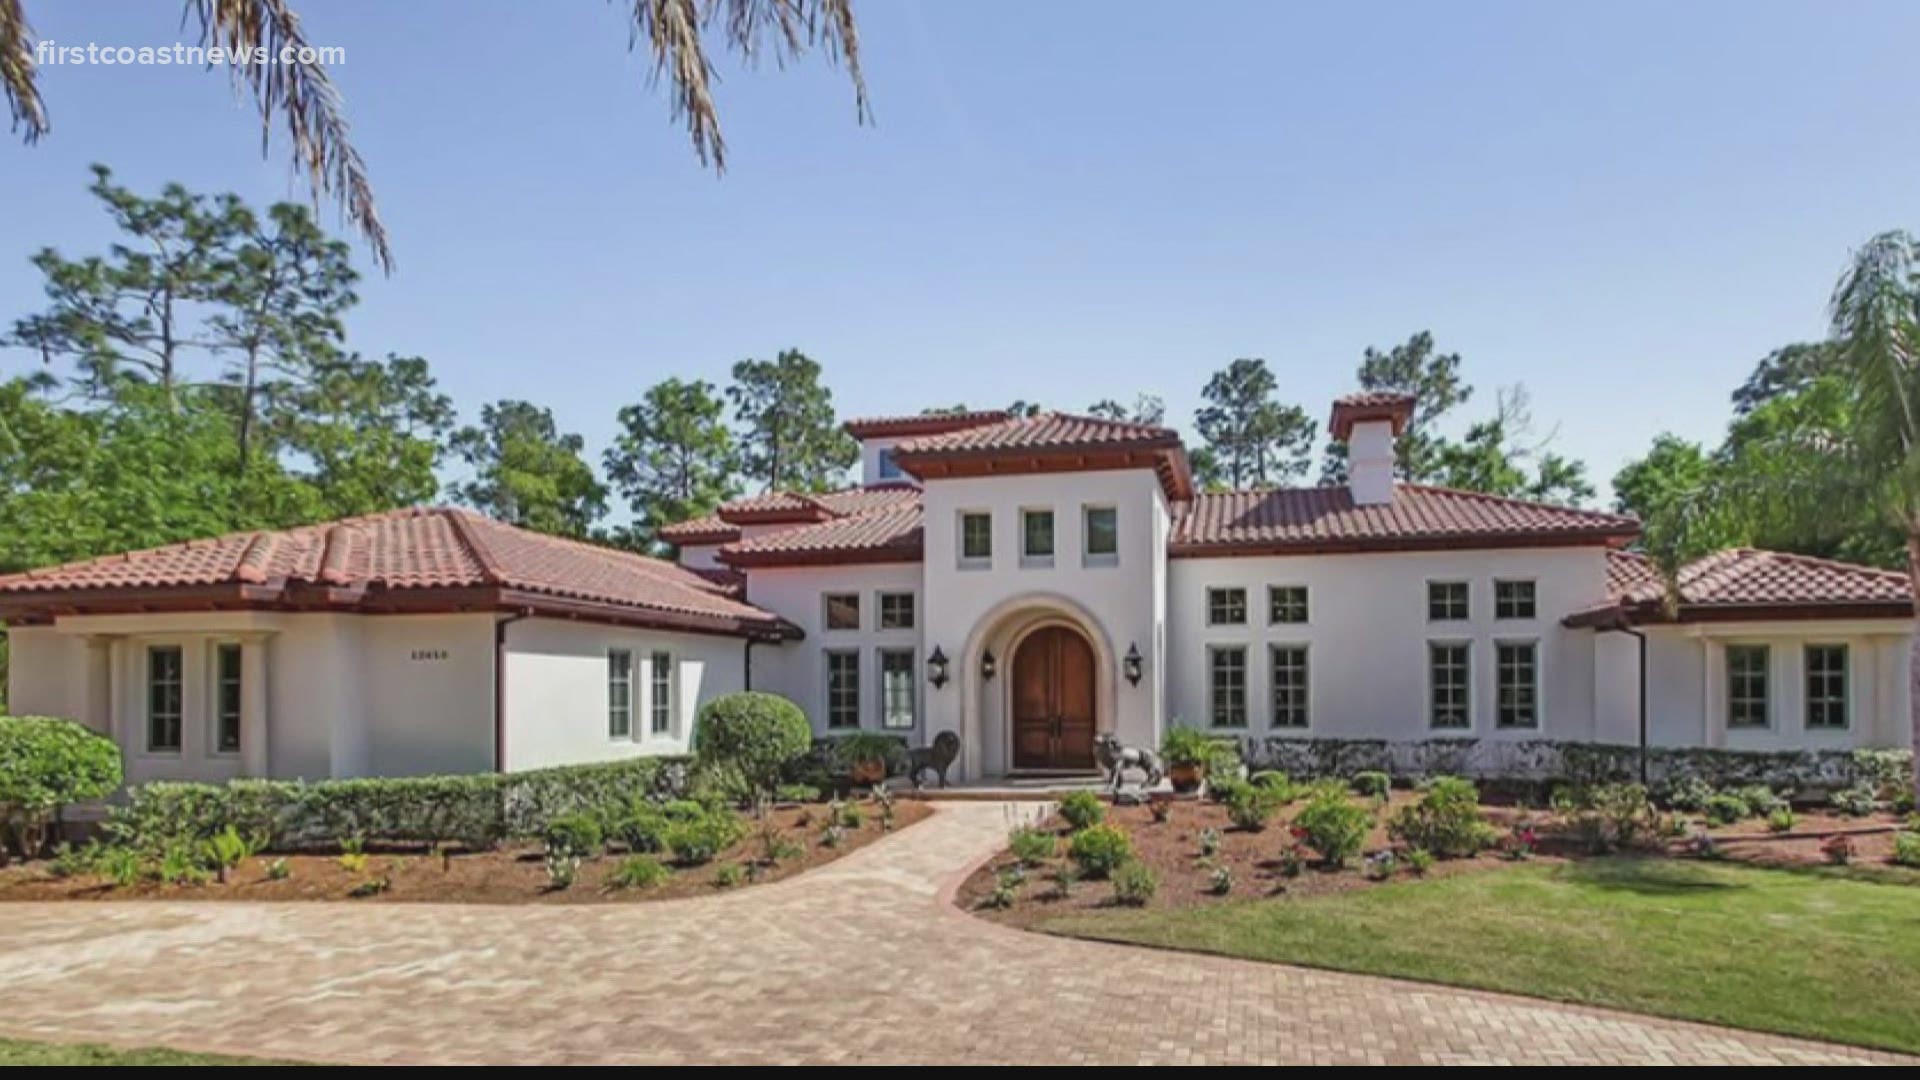 The Jacksonville Daily Record reports that the home, located in Glen Kernan Golf & Country Club, was purchased on April 16 for $2.15 million.